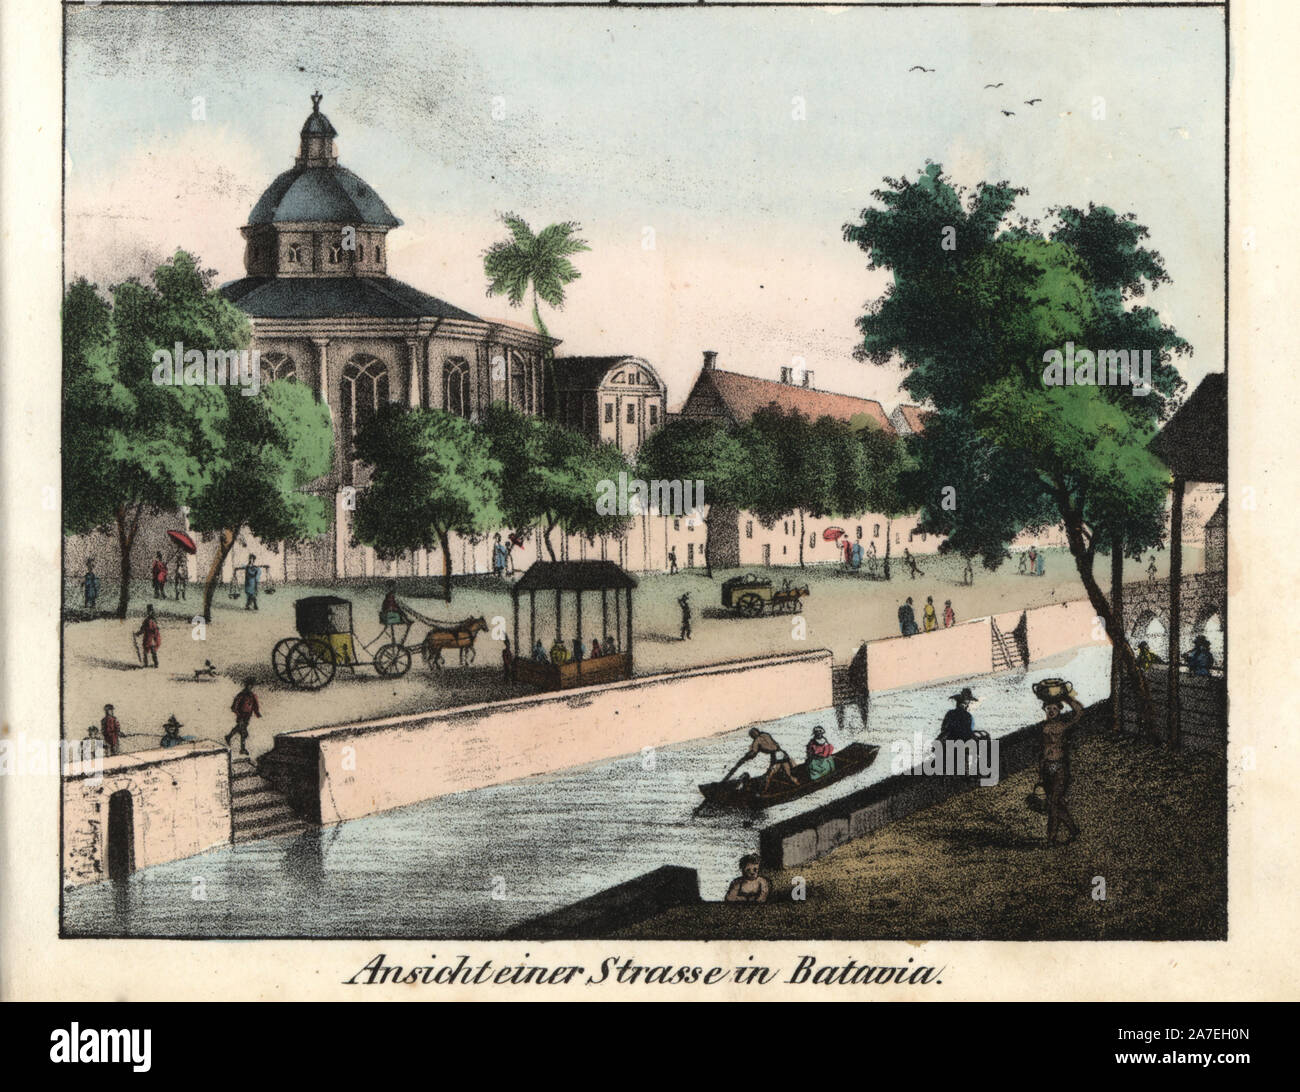 View of a street with canal, horse-drawn carriages, Europeans and natives in Batavia (Jakarta), on the island of Java, Indonesia, circa 1800, when it was a Dutch colony. Handcoloured lithograph from Friedrich Wilhelm Goedsche's 'Vollstaendige Völkergallerie in getreuen Abbildungen' (Complete Gallery of Peoples in True Pictures), Meissen, circa 1835-1840. Goedsche (1785-1863) was a German writer, bookseller and publisher in Meissen. Many of the illustrations were adapted from Bertuch's 'Bilderbuch fur Kinder' and others. Stock Photo